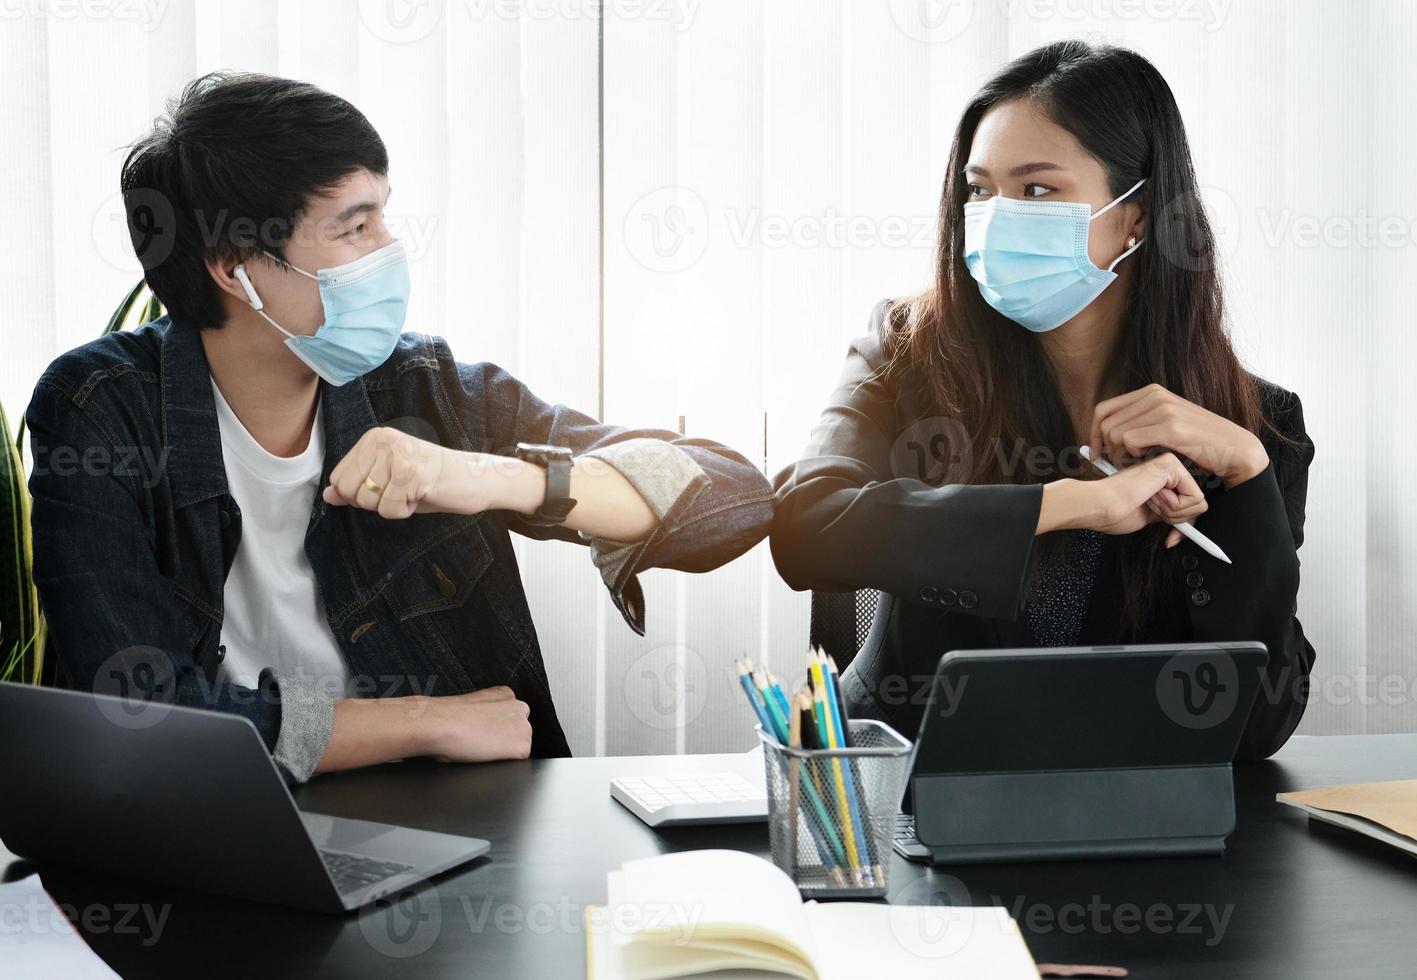 Two professionals bumping elbows with masks on photo